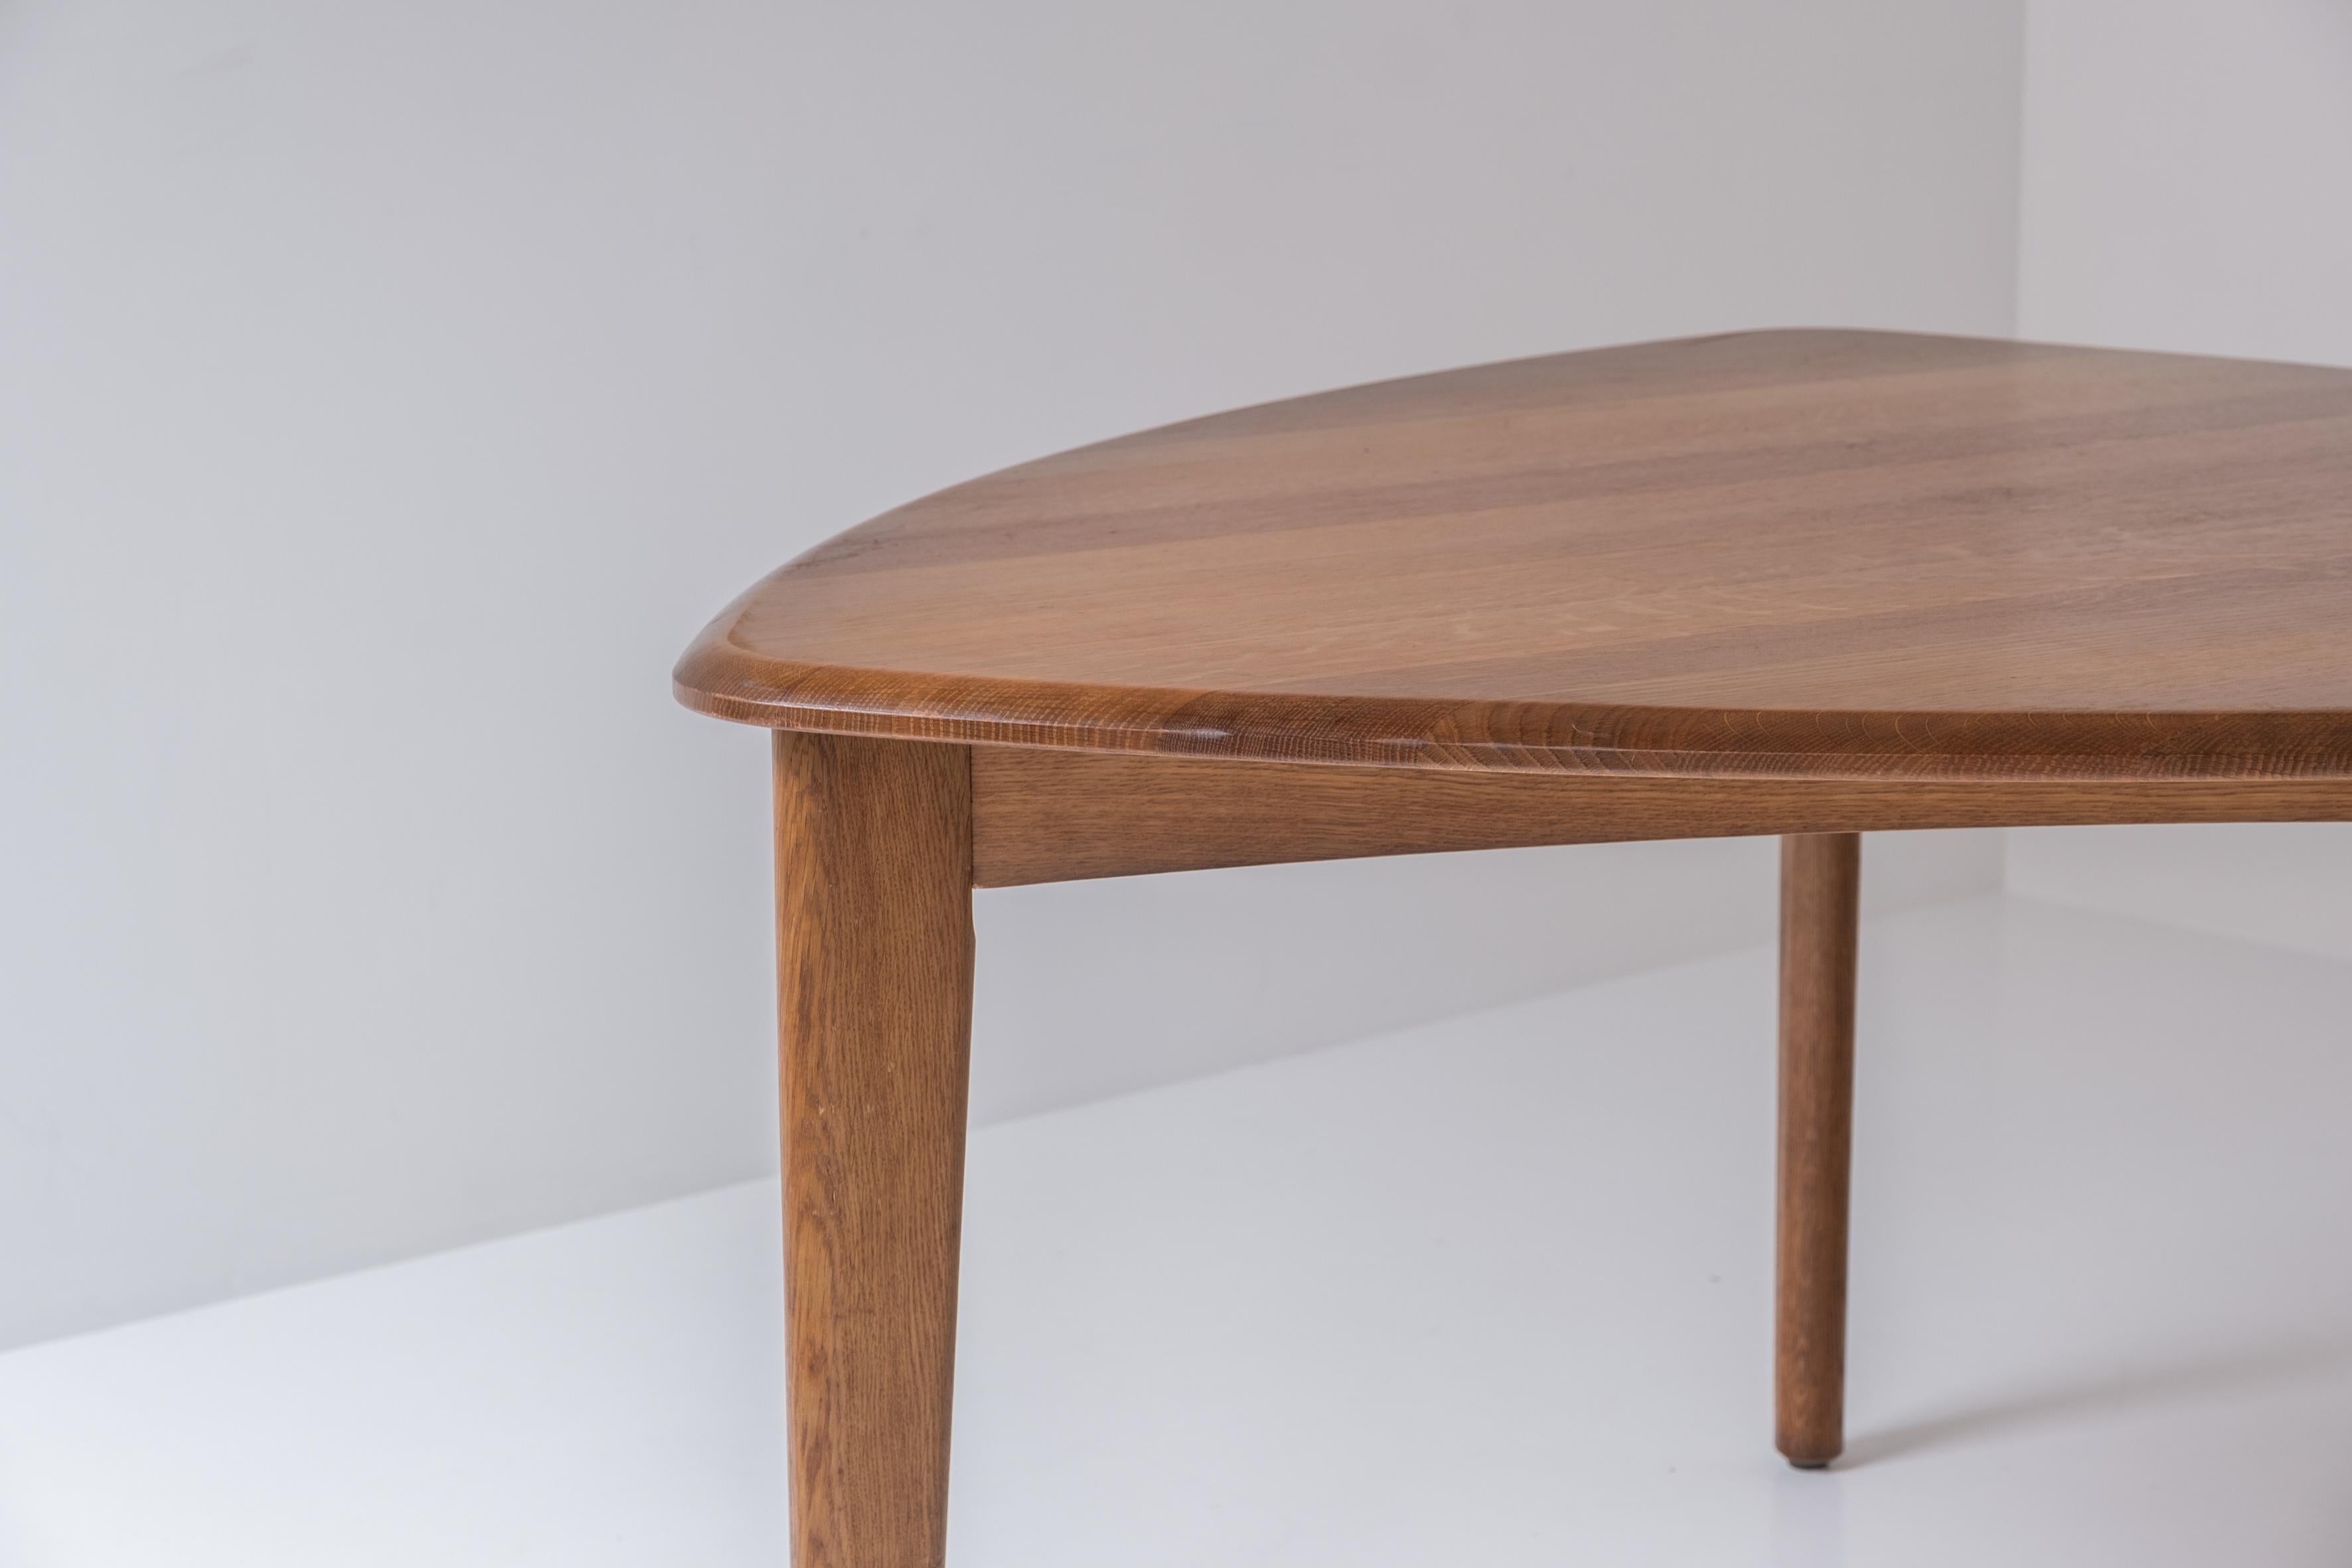 French Solid Oak Triangle Shaped Dining Table from France, Designed in the 1960s